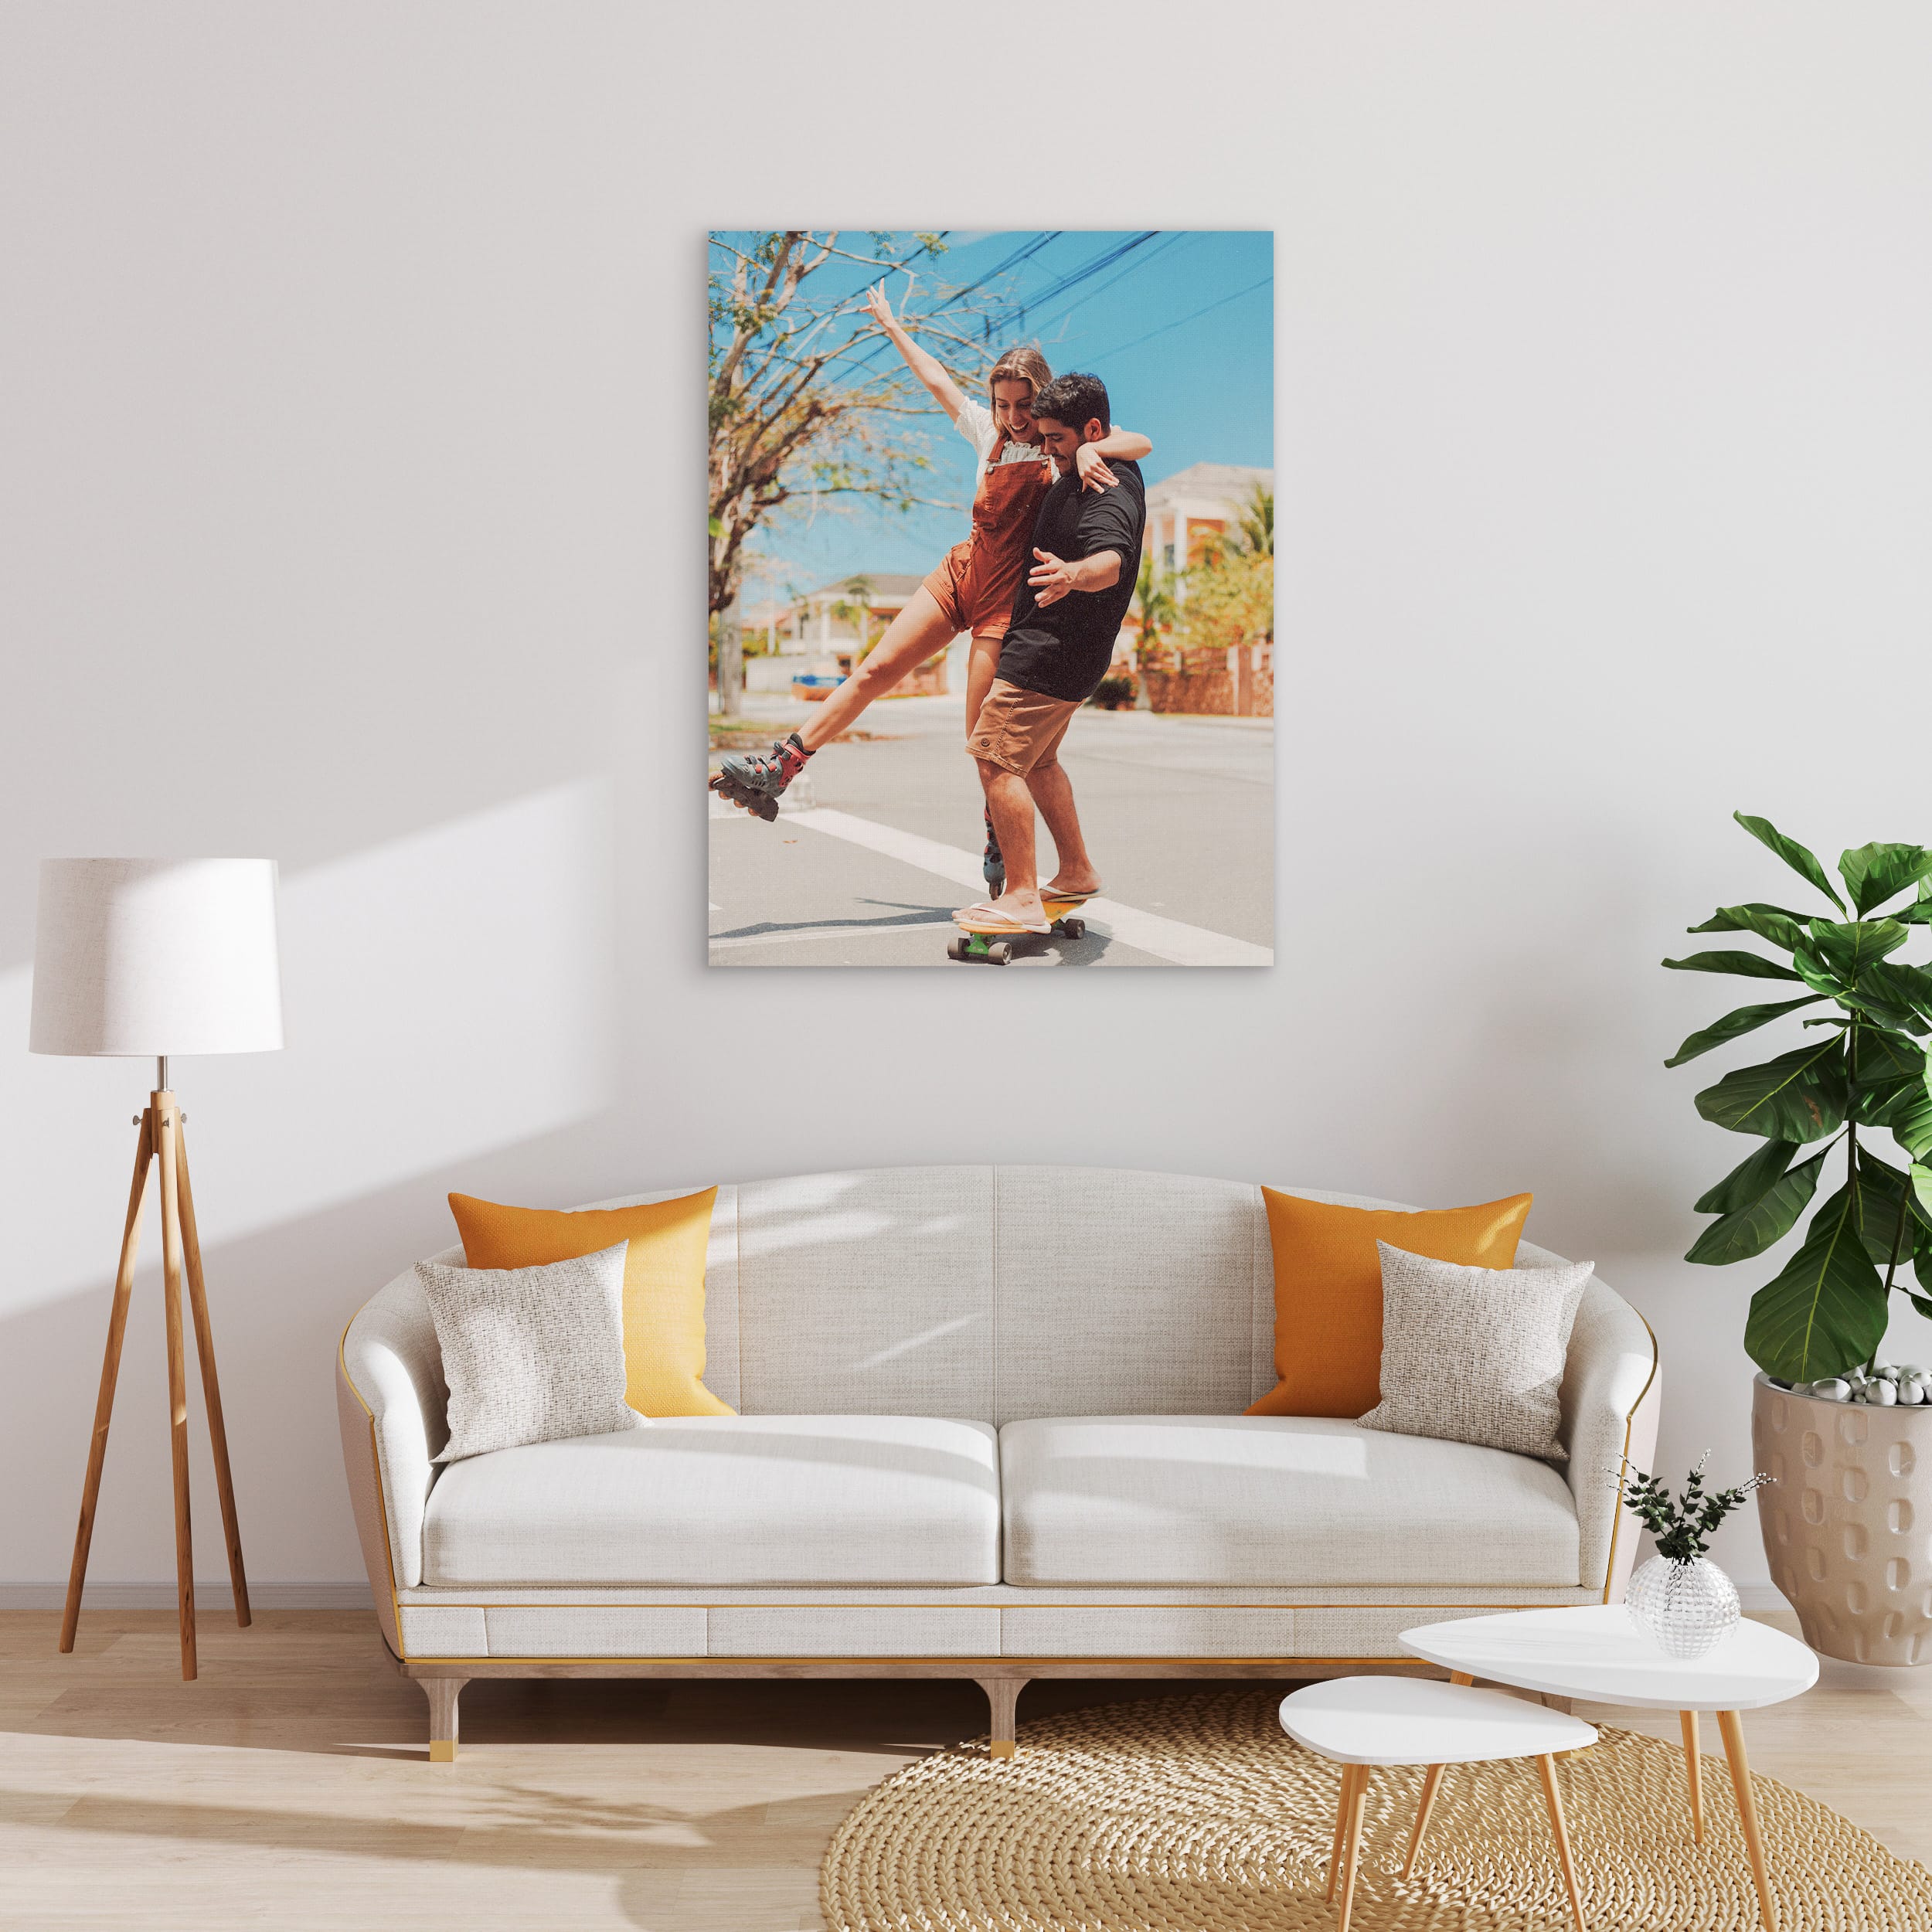 Canvas print in living room of two friends learning how to roller skate